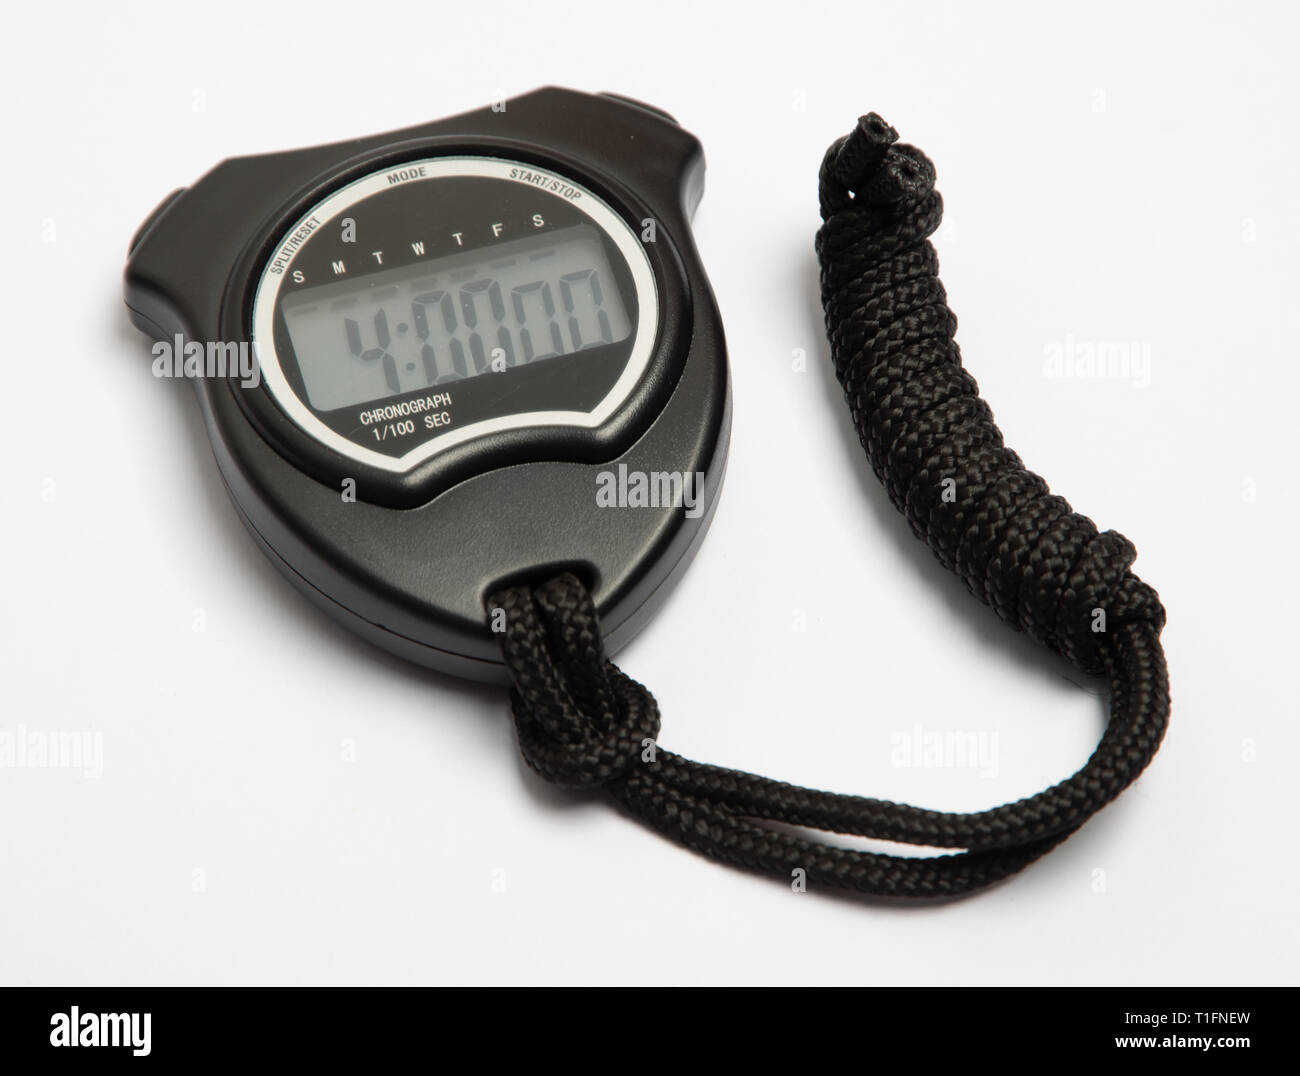 digital stop watch showing exactly 4 minutes.  Black plastic case with an LCD display.  Attached is a cord rolled into a tidy knot. Stock Photo